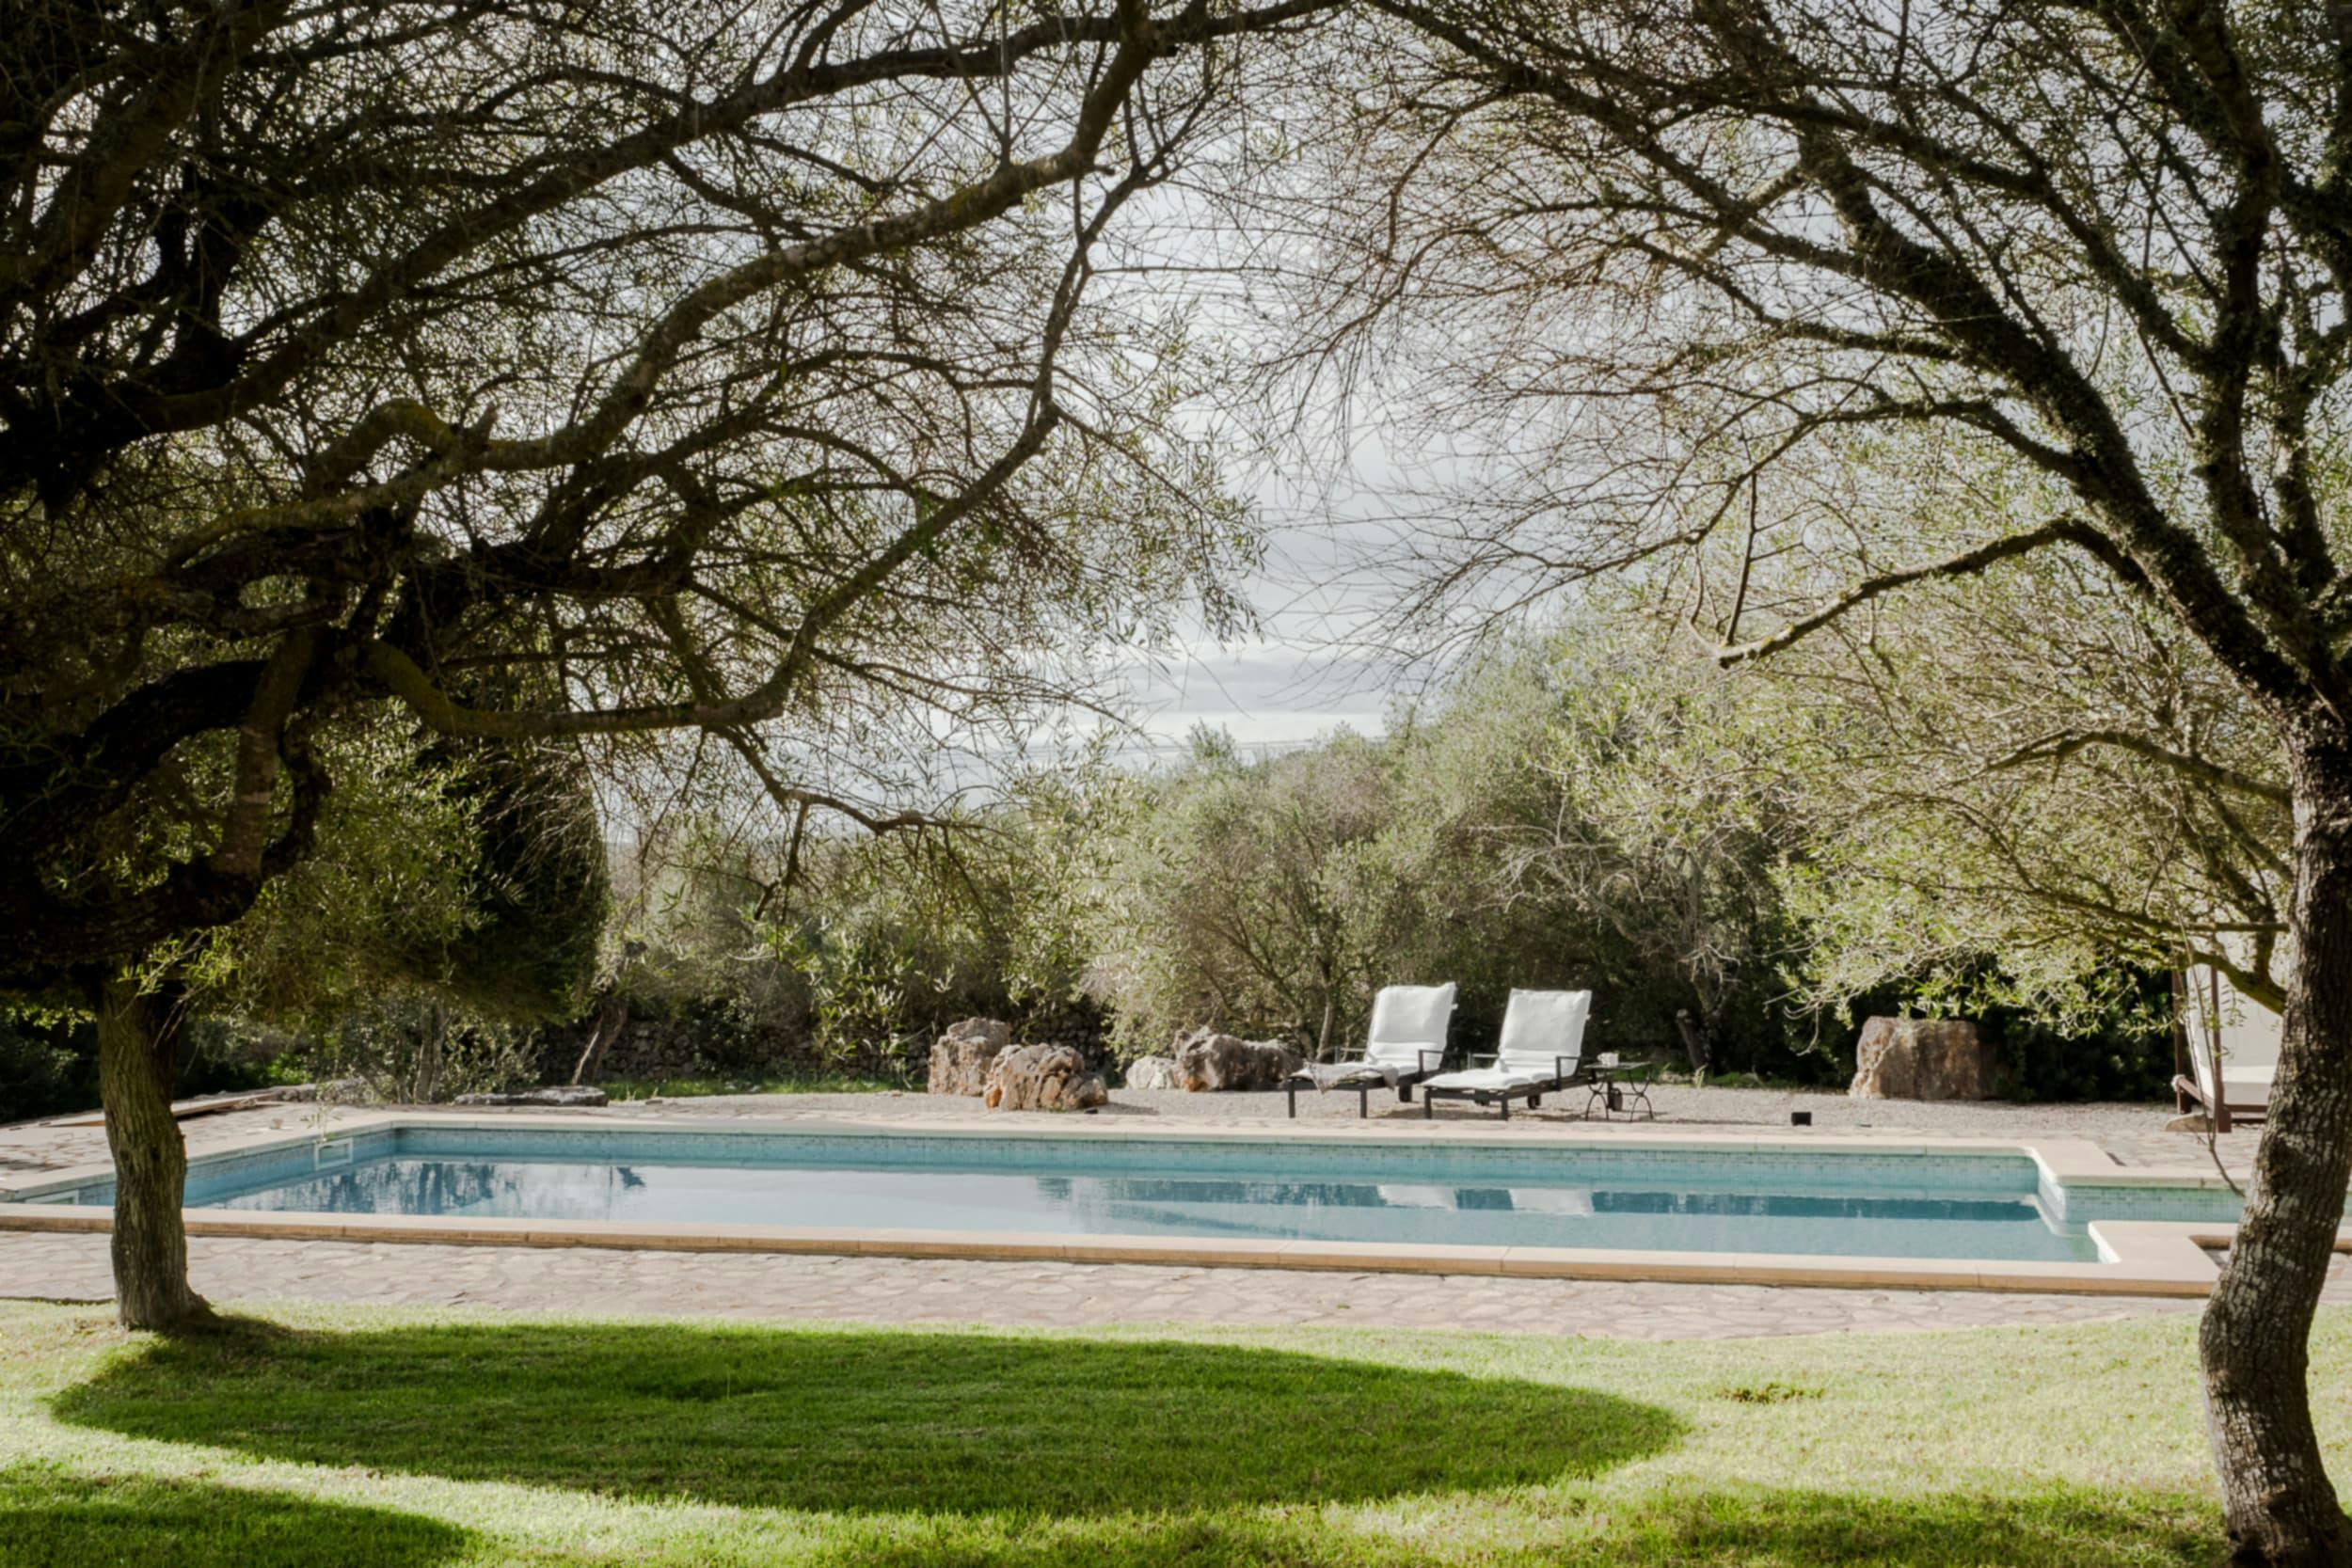 A large swimming pool is surrounded by a lush green lawn, with a patio area and chairs nearby.